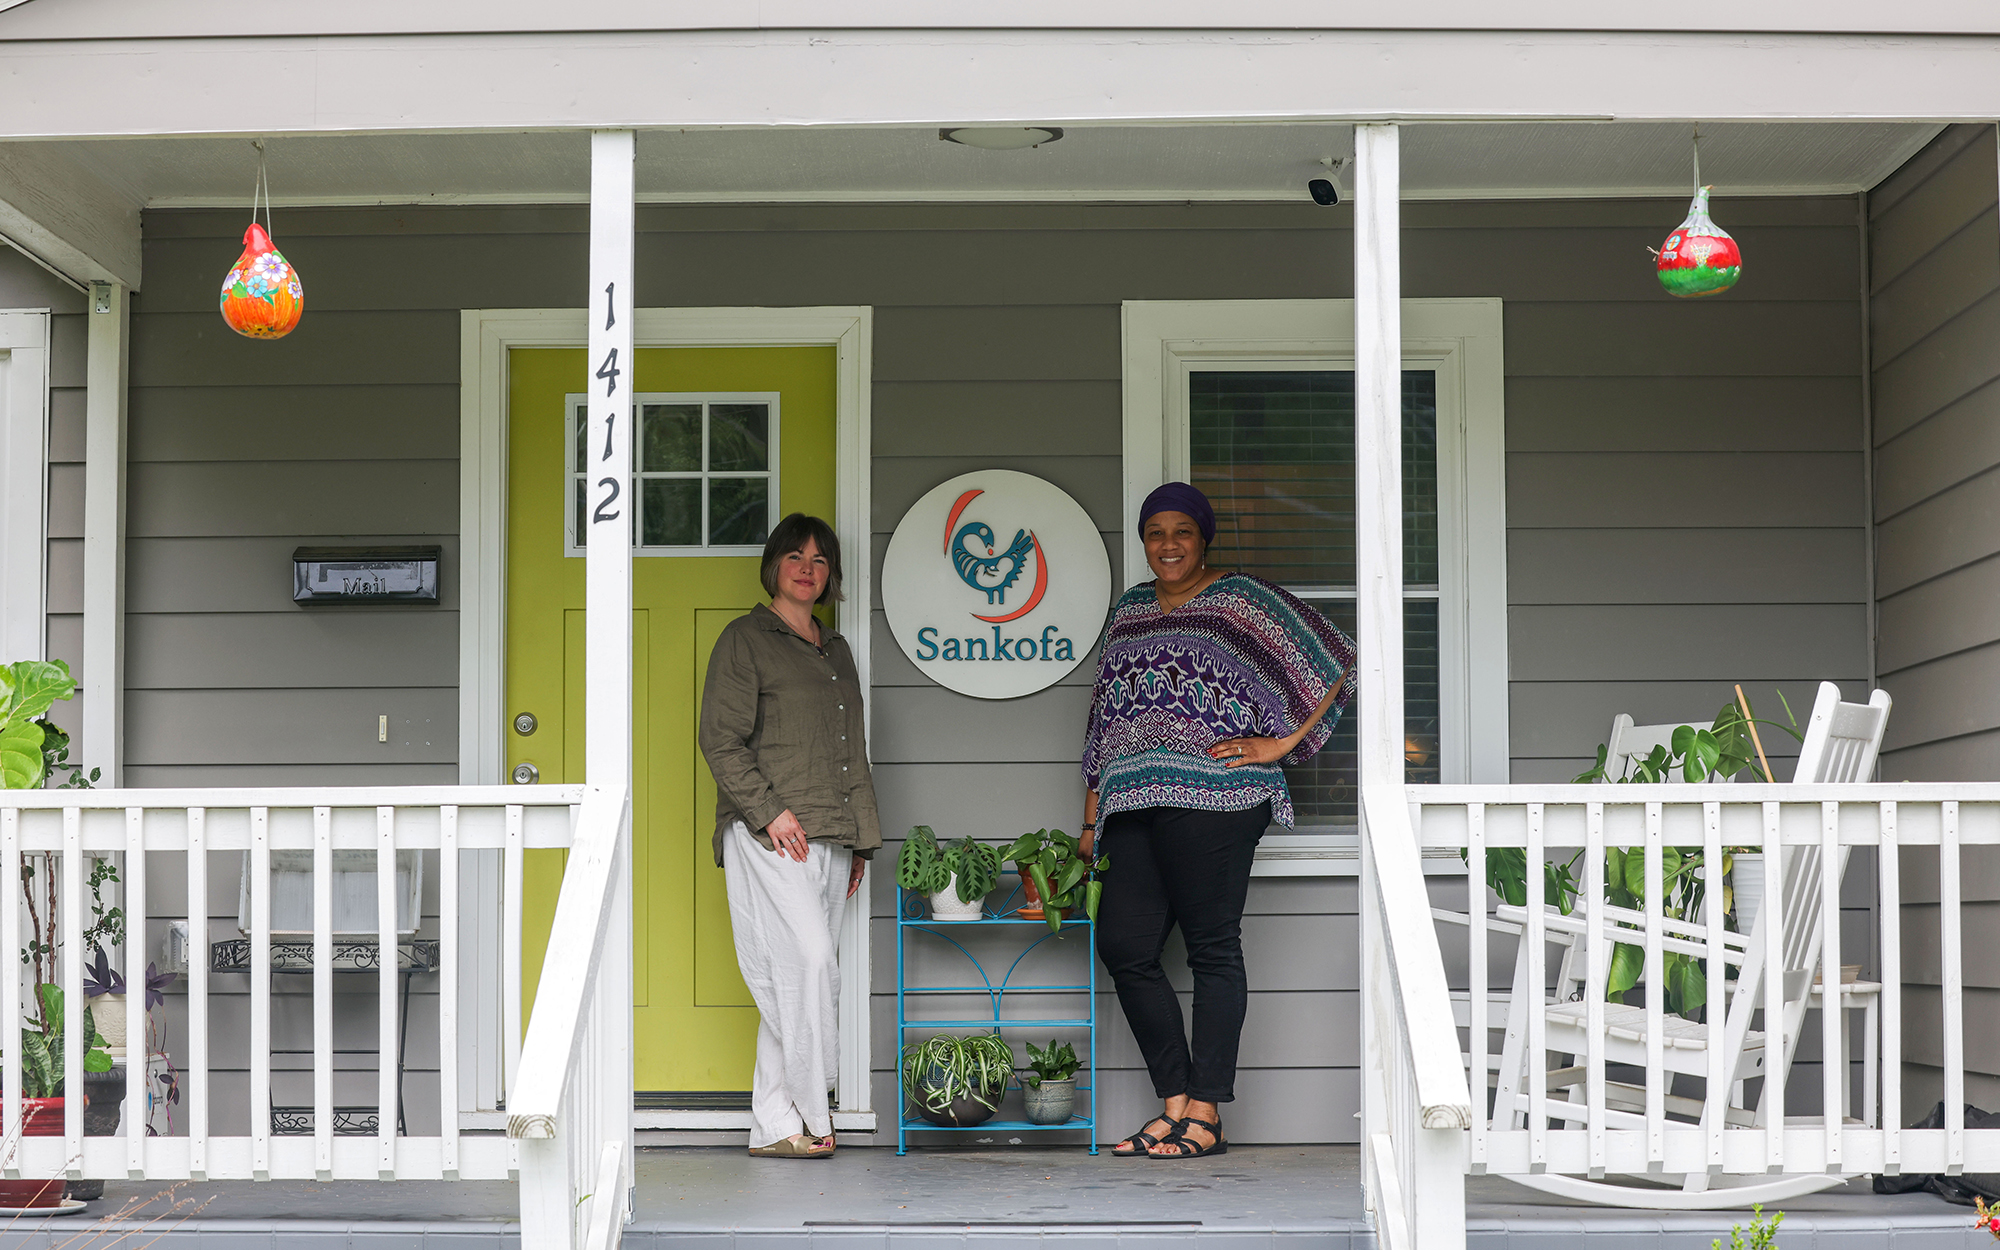 Amber Rodriguez, left, and Tina Braimah pose on the porch of Sankofa Birth and Women’s Center, which is located within a neighborhood to ensure it is accessible to the community. (Photo by Shelby Rae Wills/News21)